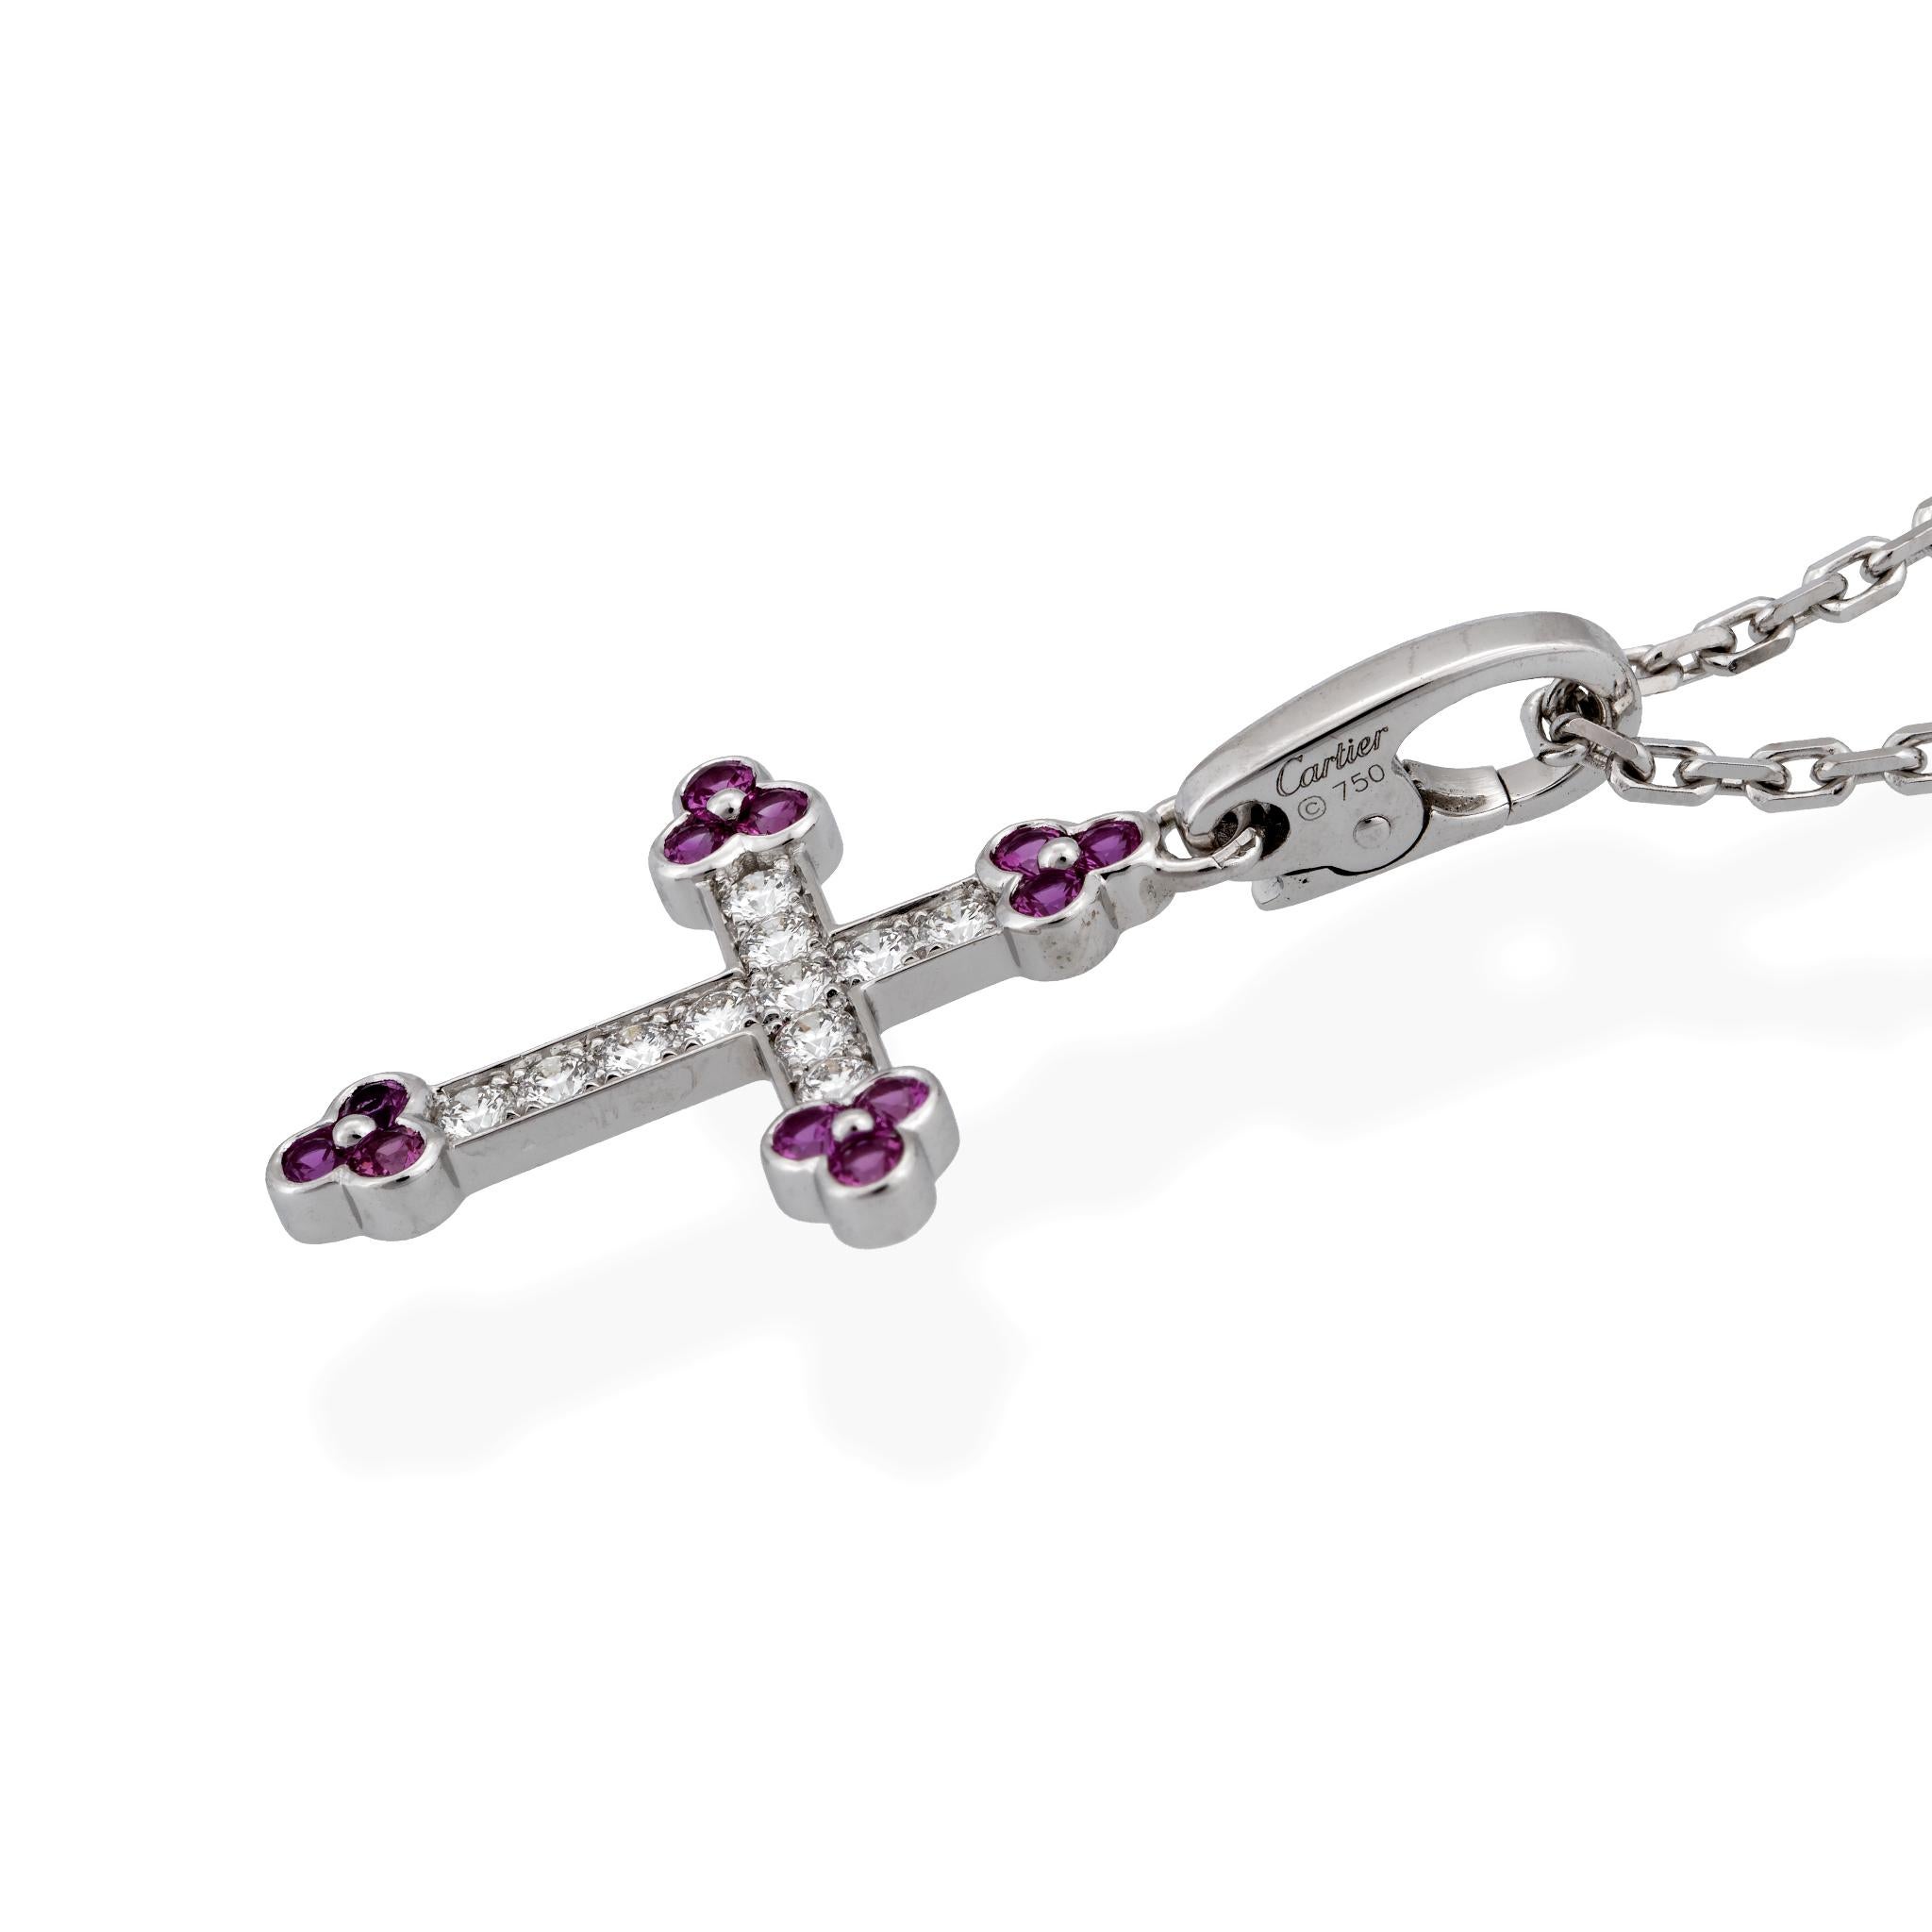 METAL TYPE: 18K White Gold
STONE WEIGHT: 0.22ct twd
TOTAL WEIGHT: 7.9g
NECKLACE LENGTH: 16